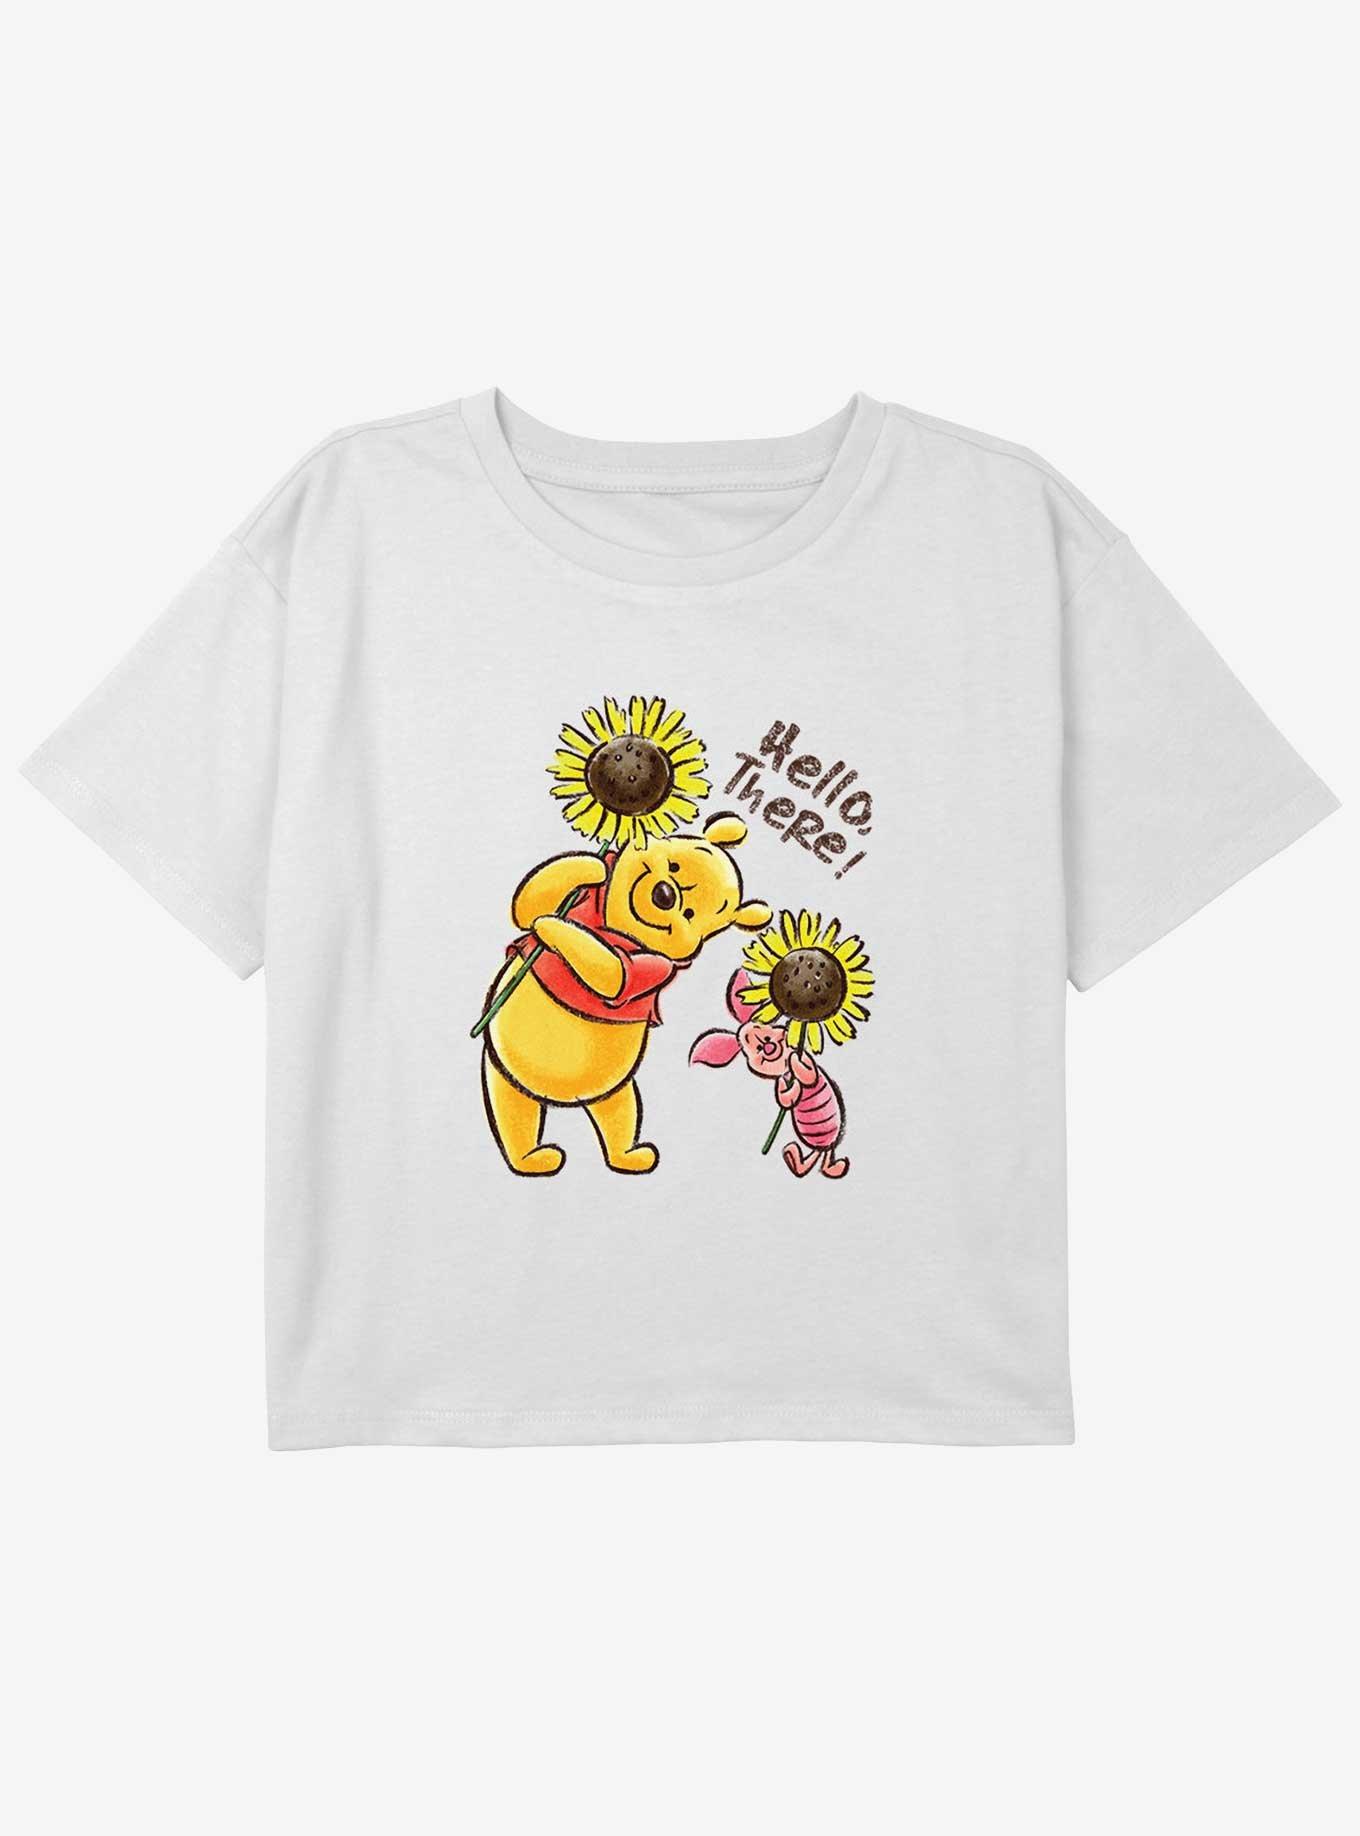 Disney Winnie The Pooh Hello There Girls Youth Crop T-Shirt, WHITE, hi-res